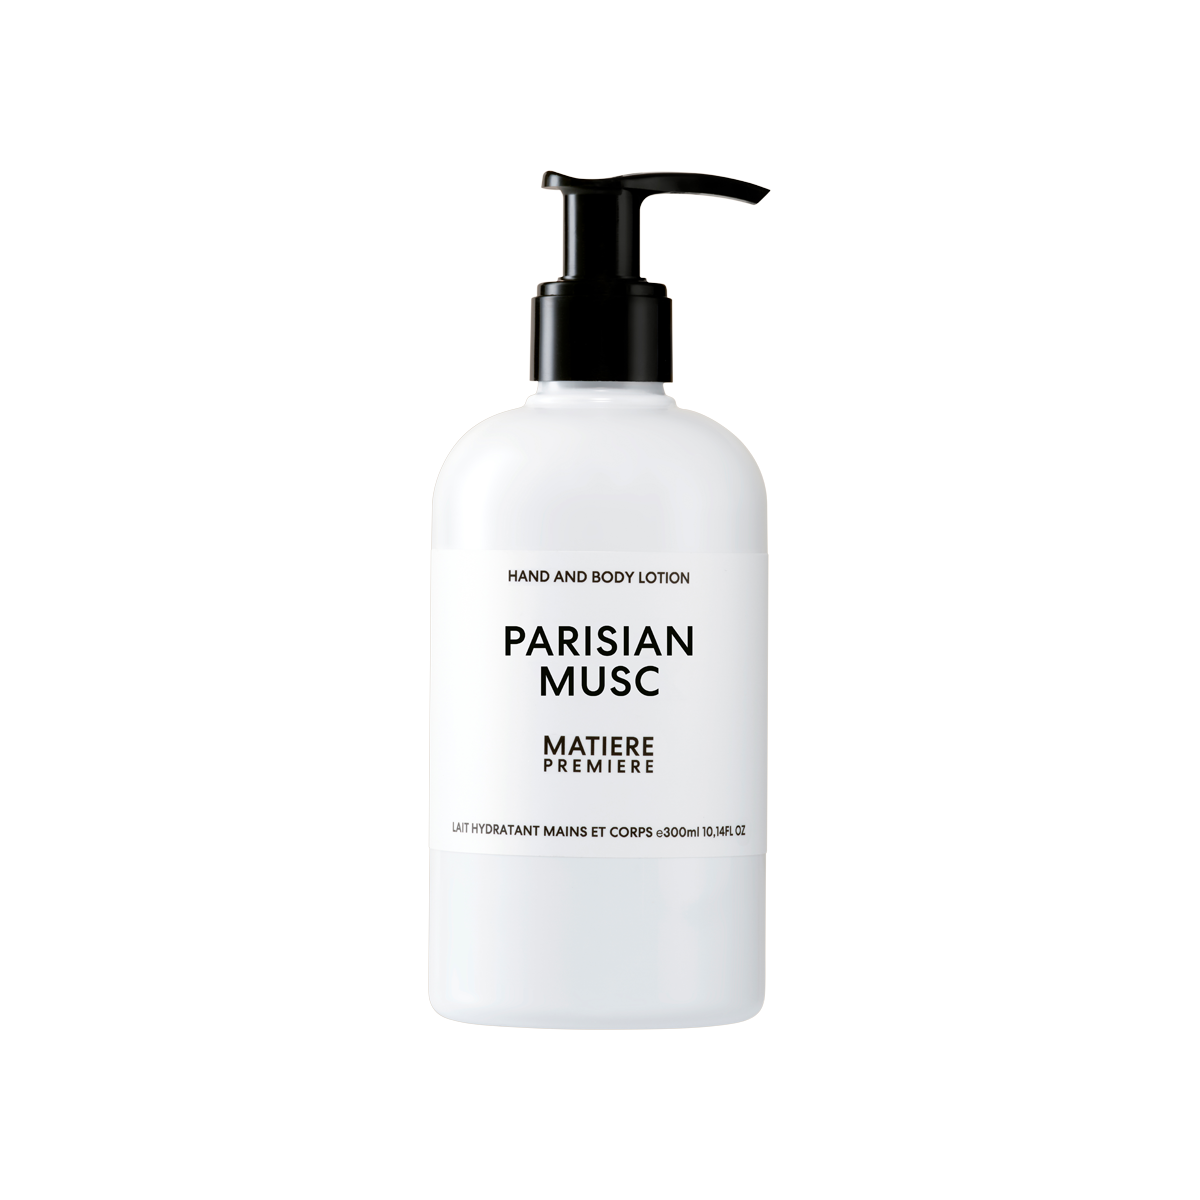 Matiere Premiere - Hand and body lotion Parisian Musc